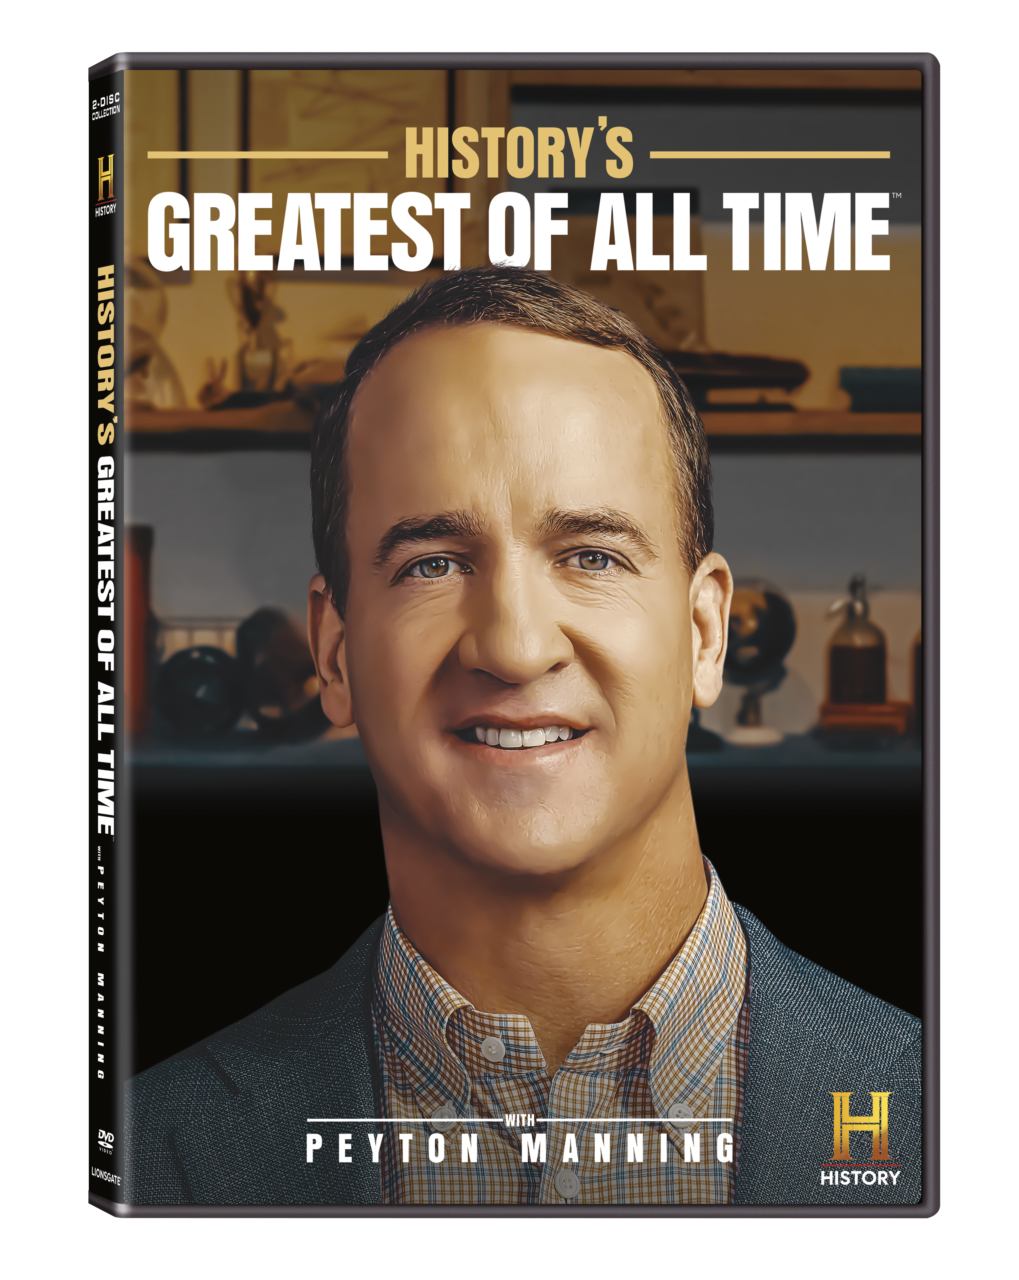 History's Greatest Of All Time With Peyton Manning DVD cover (History)